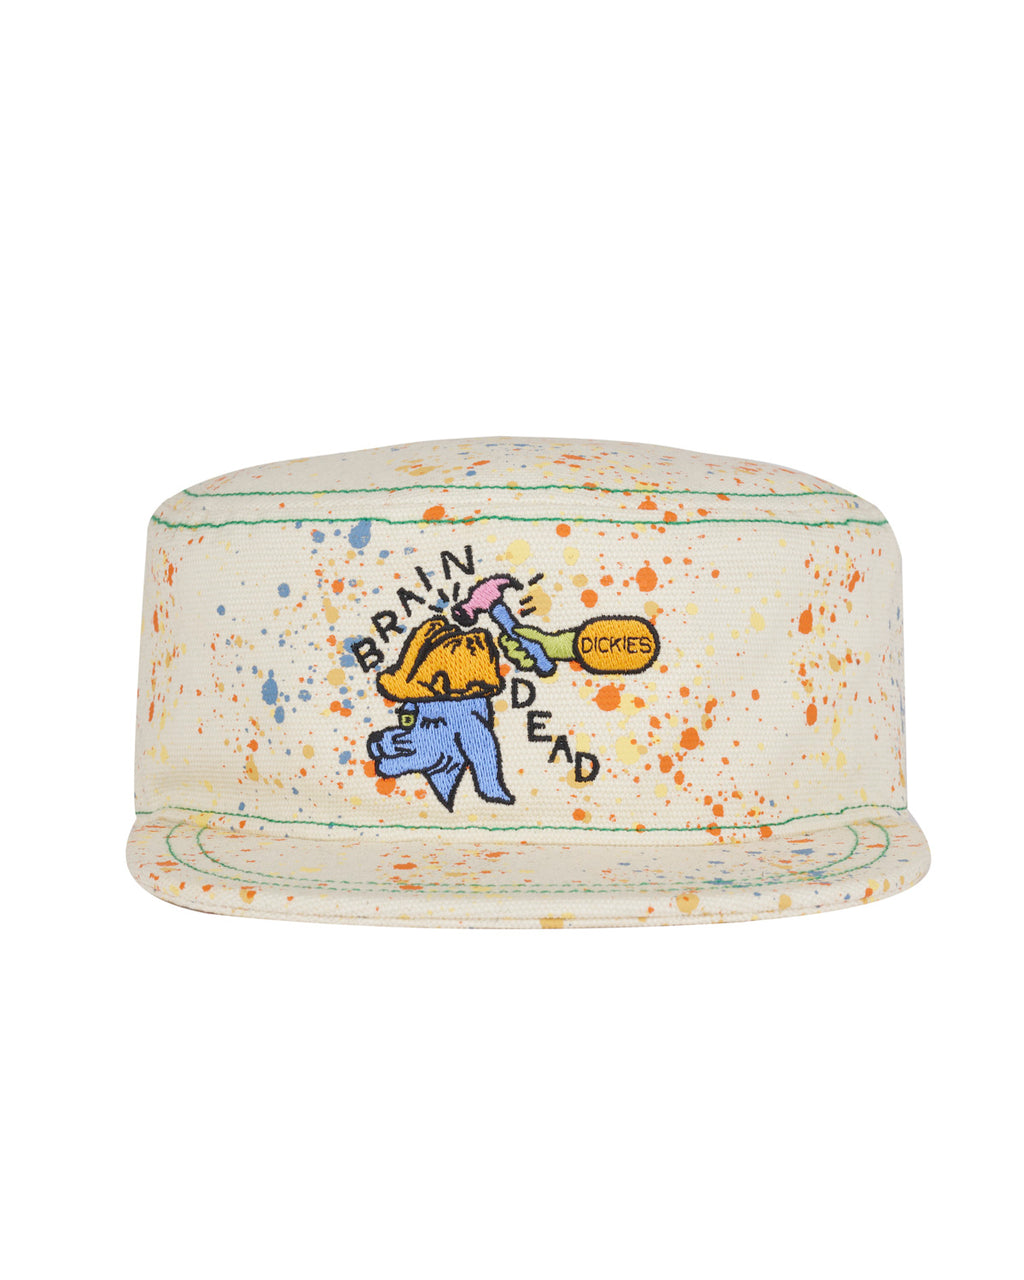 Dickies Embroidered Painters Cap - White Splatter